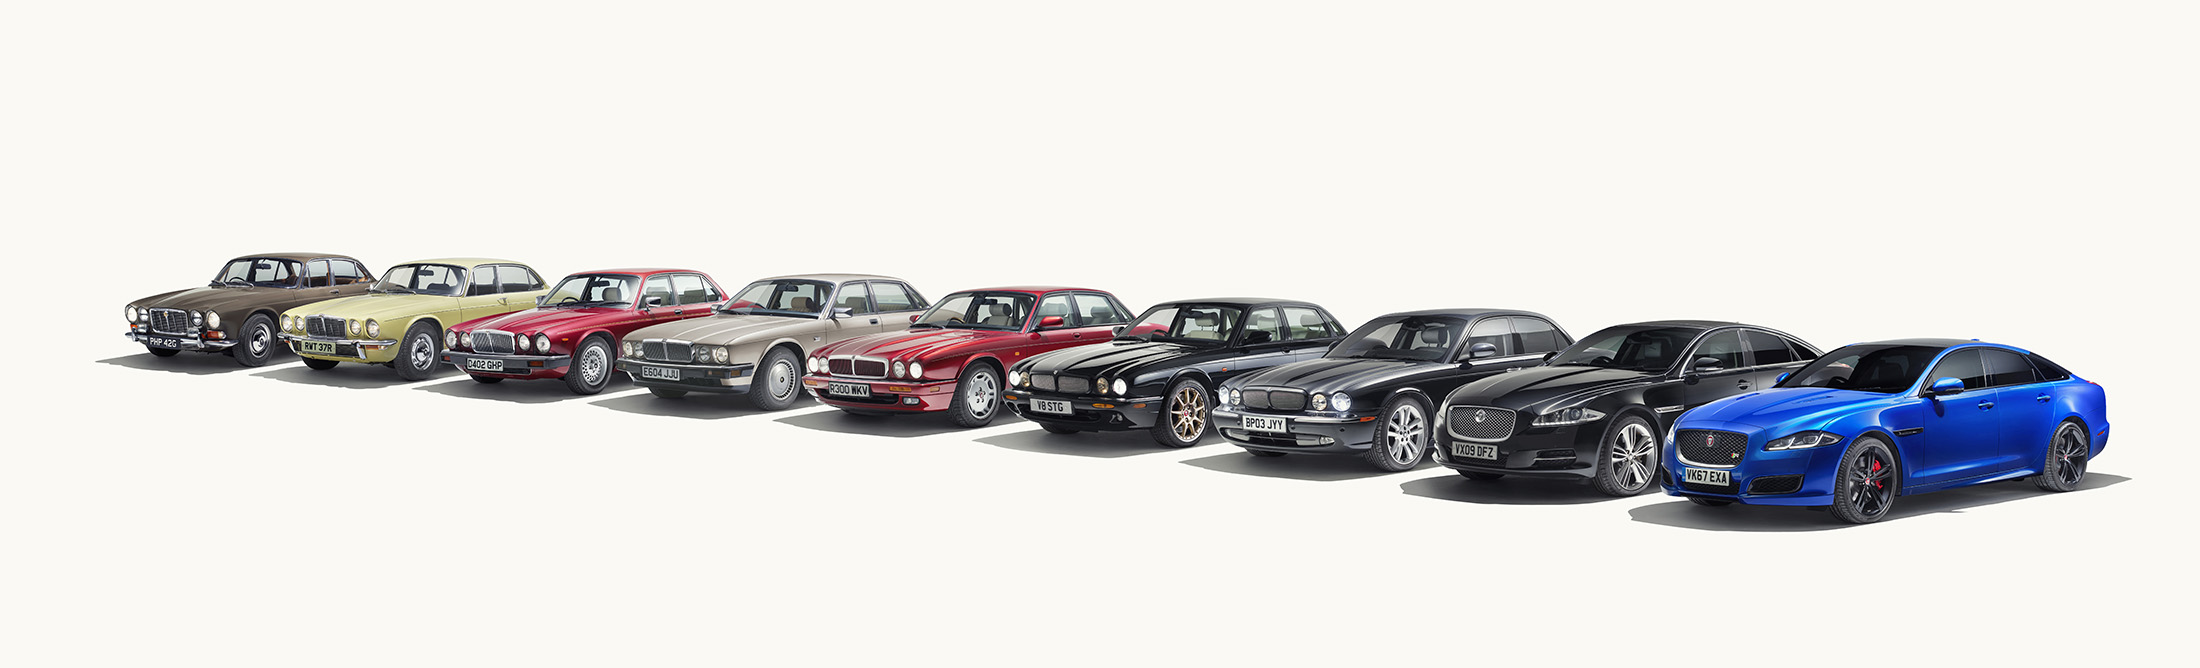 Driving a Vintage Jaguar XJ: History, Style, and the Latest Specs -  Bloomberg